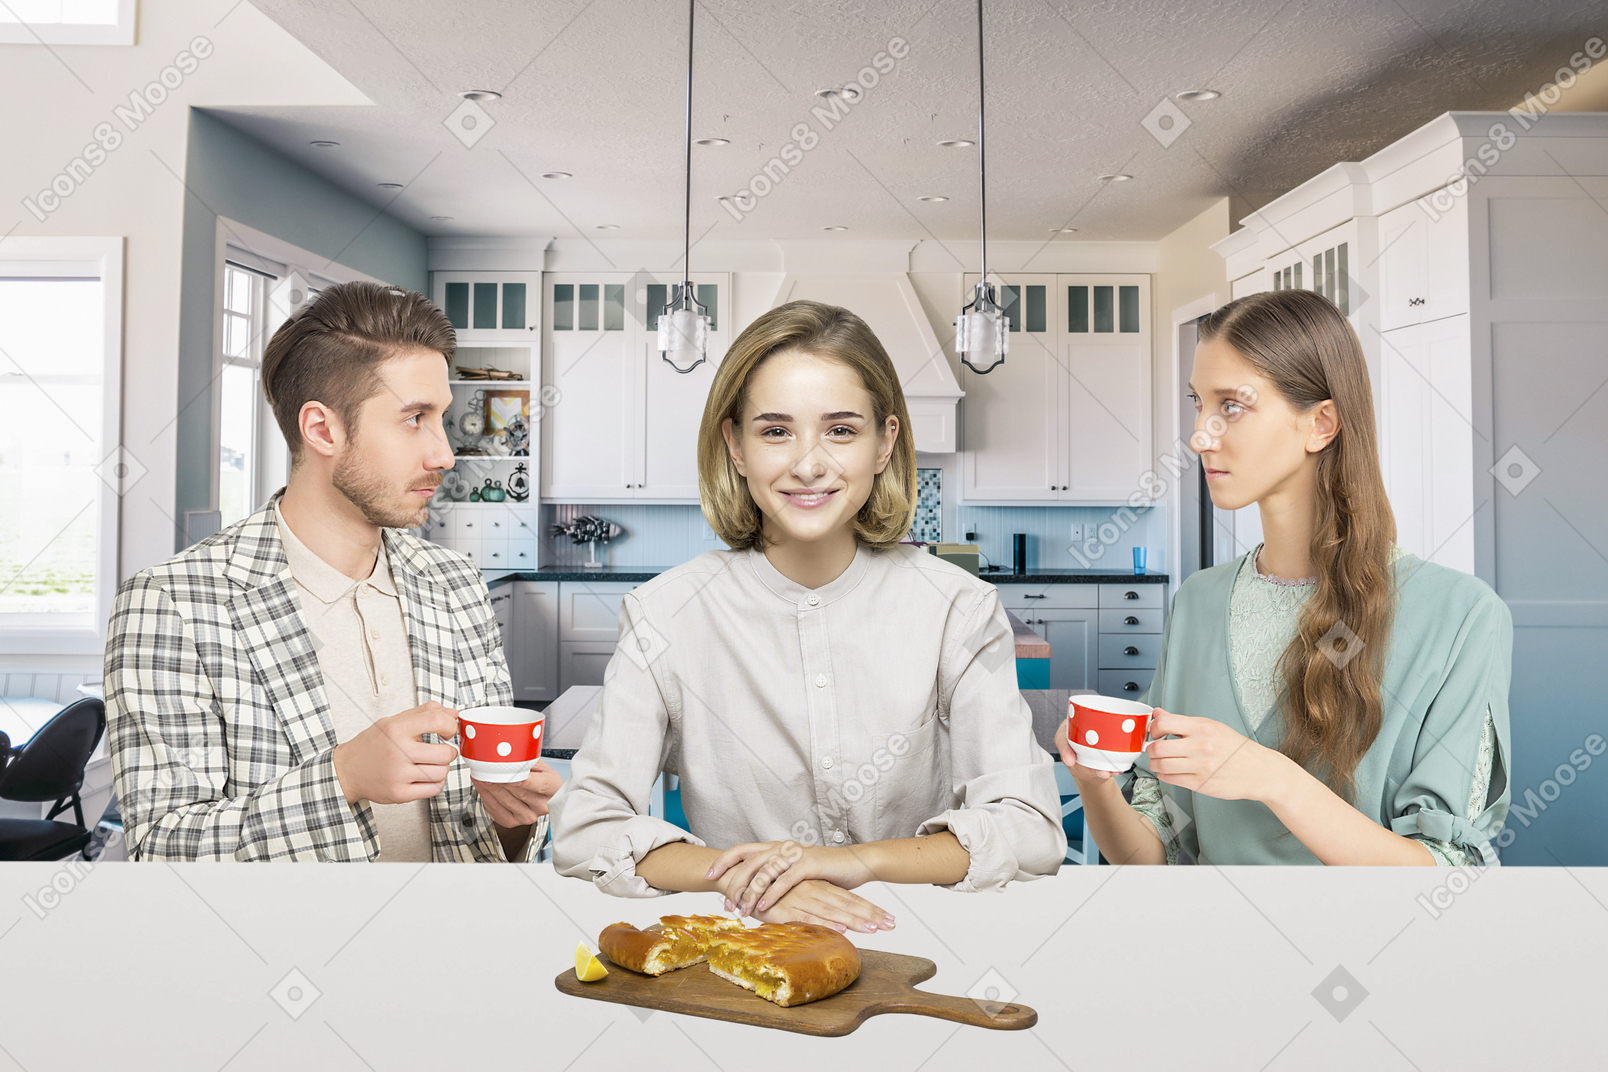 A group of people sitting around a kitchen table